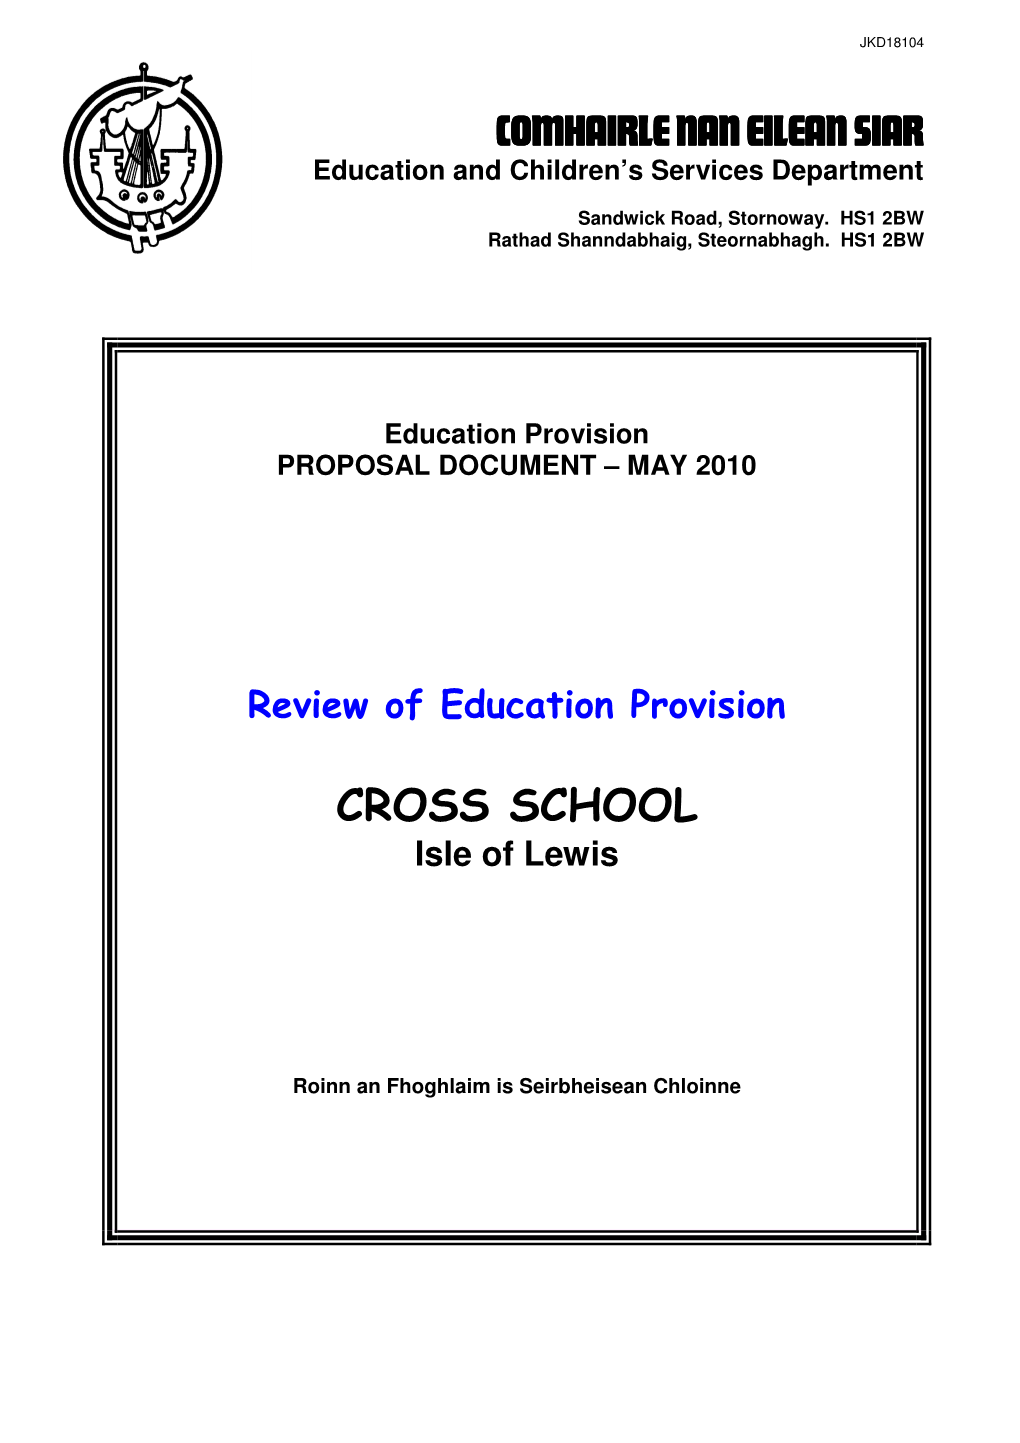 Education Provision PROPOSAL DOCUMENT – MAY 2010